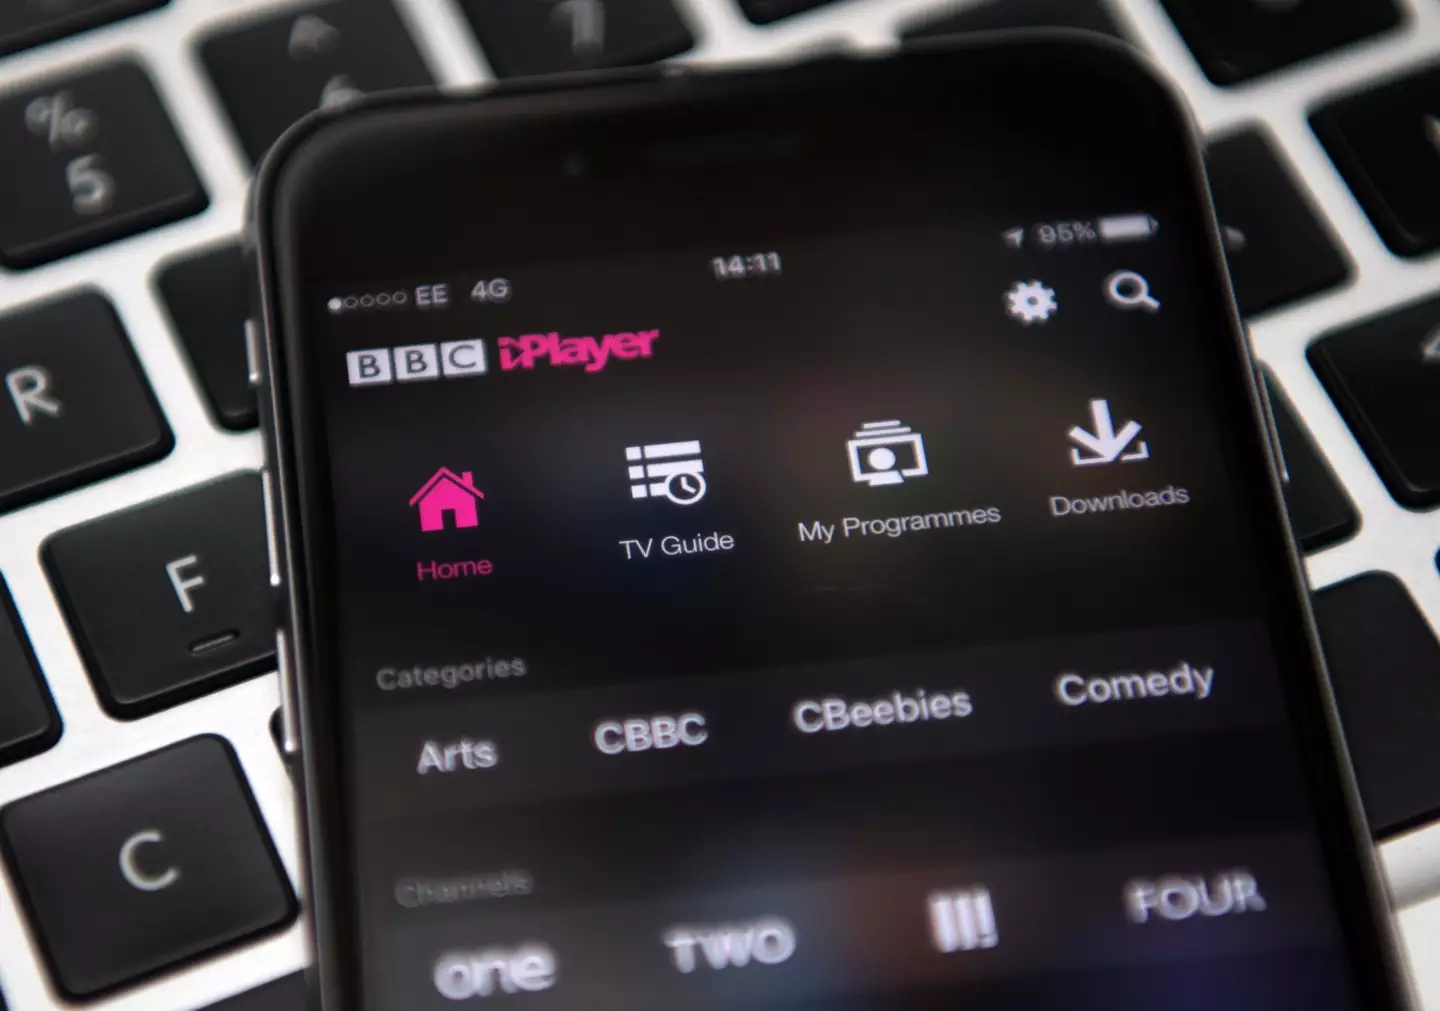 If you watch the iPlayer you must pay for a TV Licence.